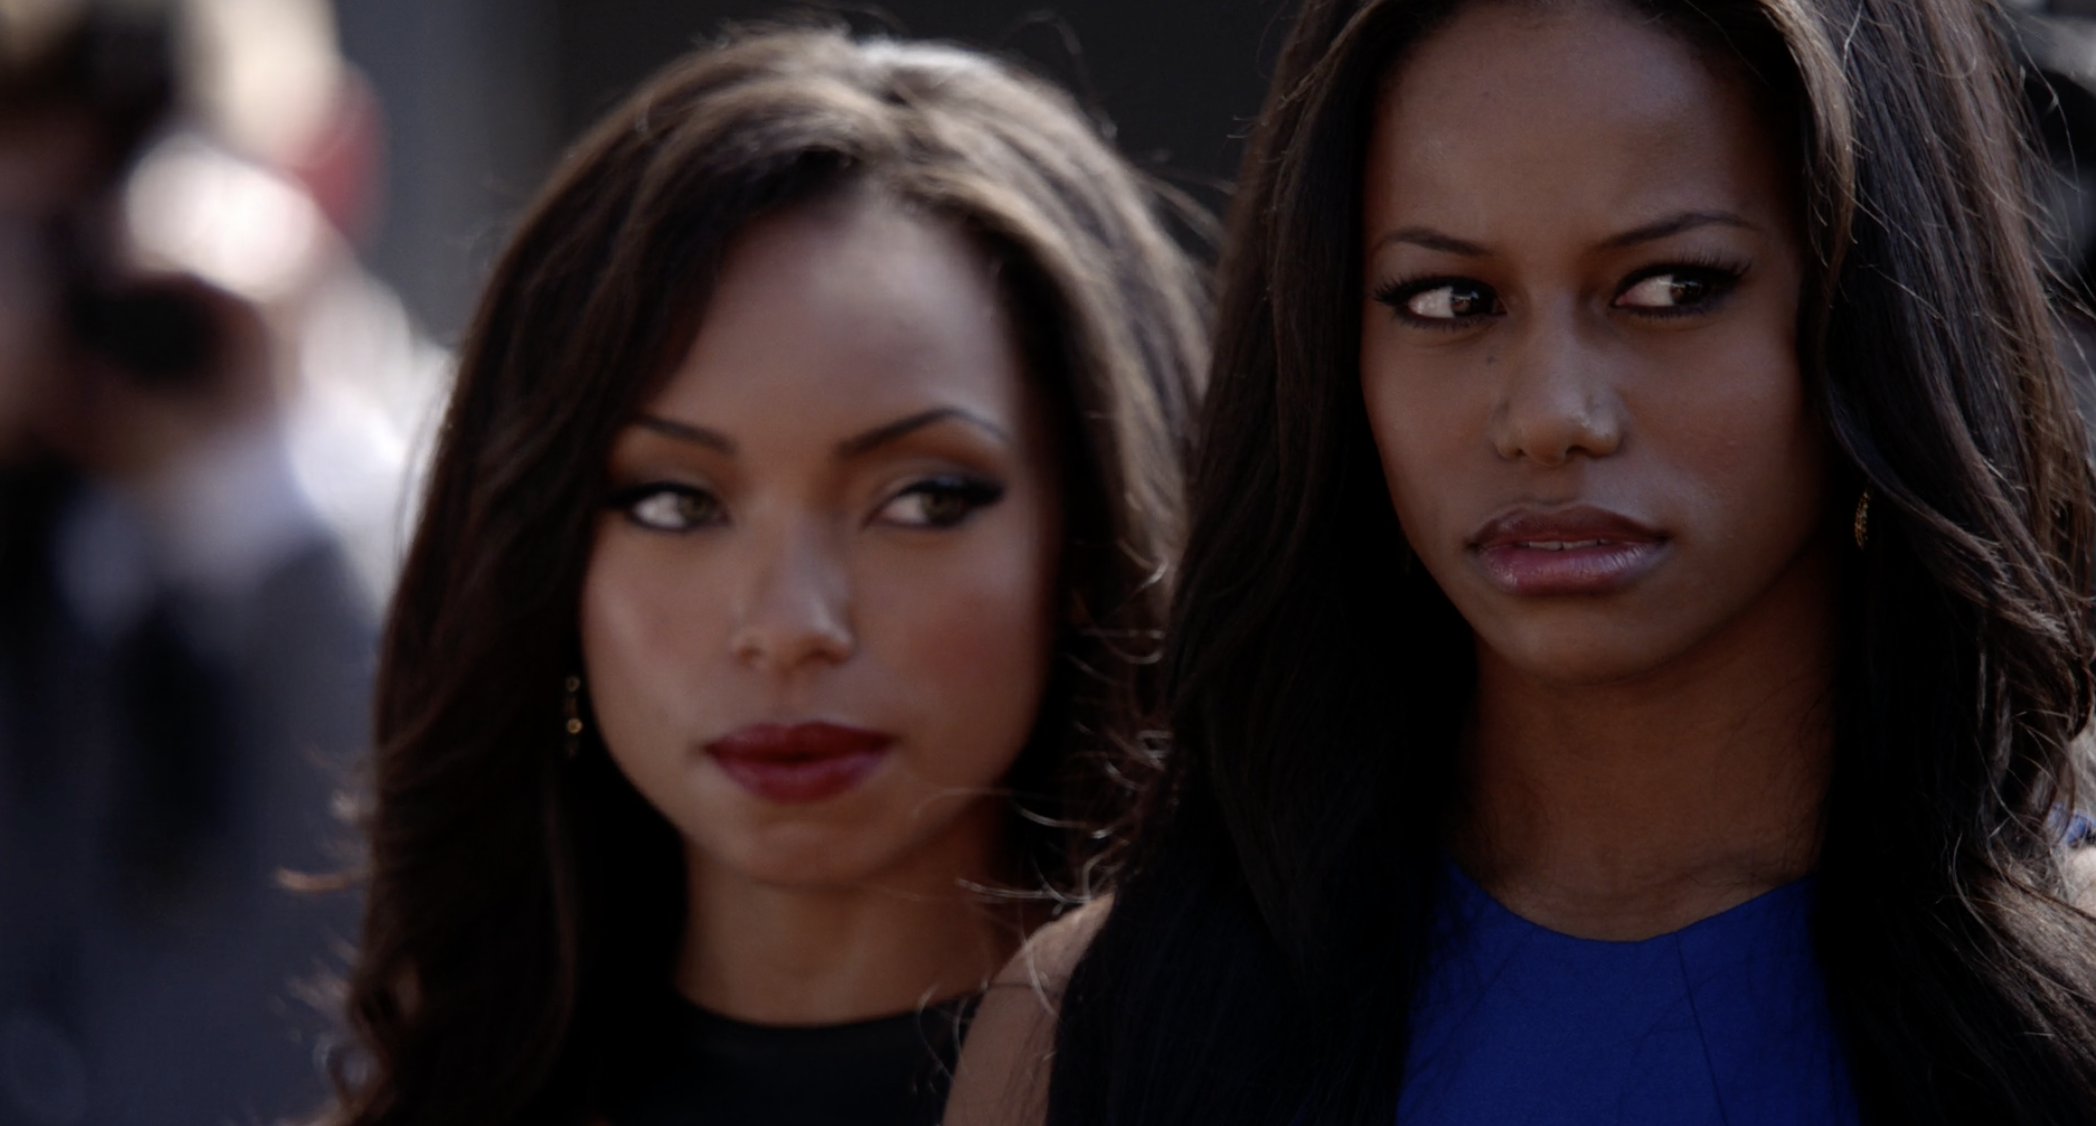 Taylour Paige as Ahsha Hayes and Logan Browning as Jelena Howard on episode 201 of Hit the Floor.